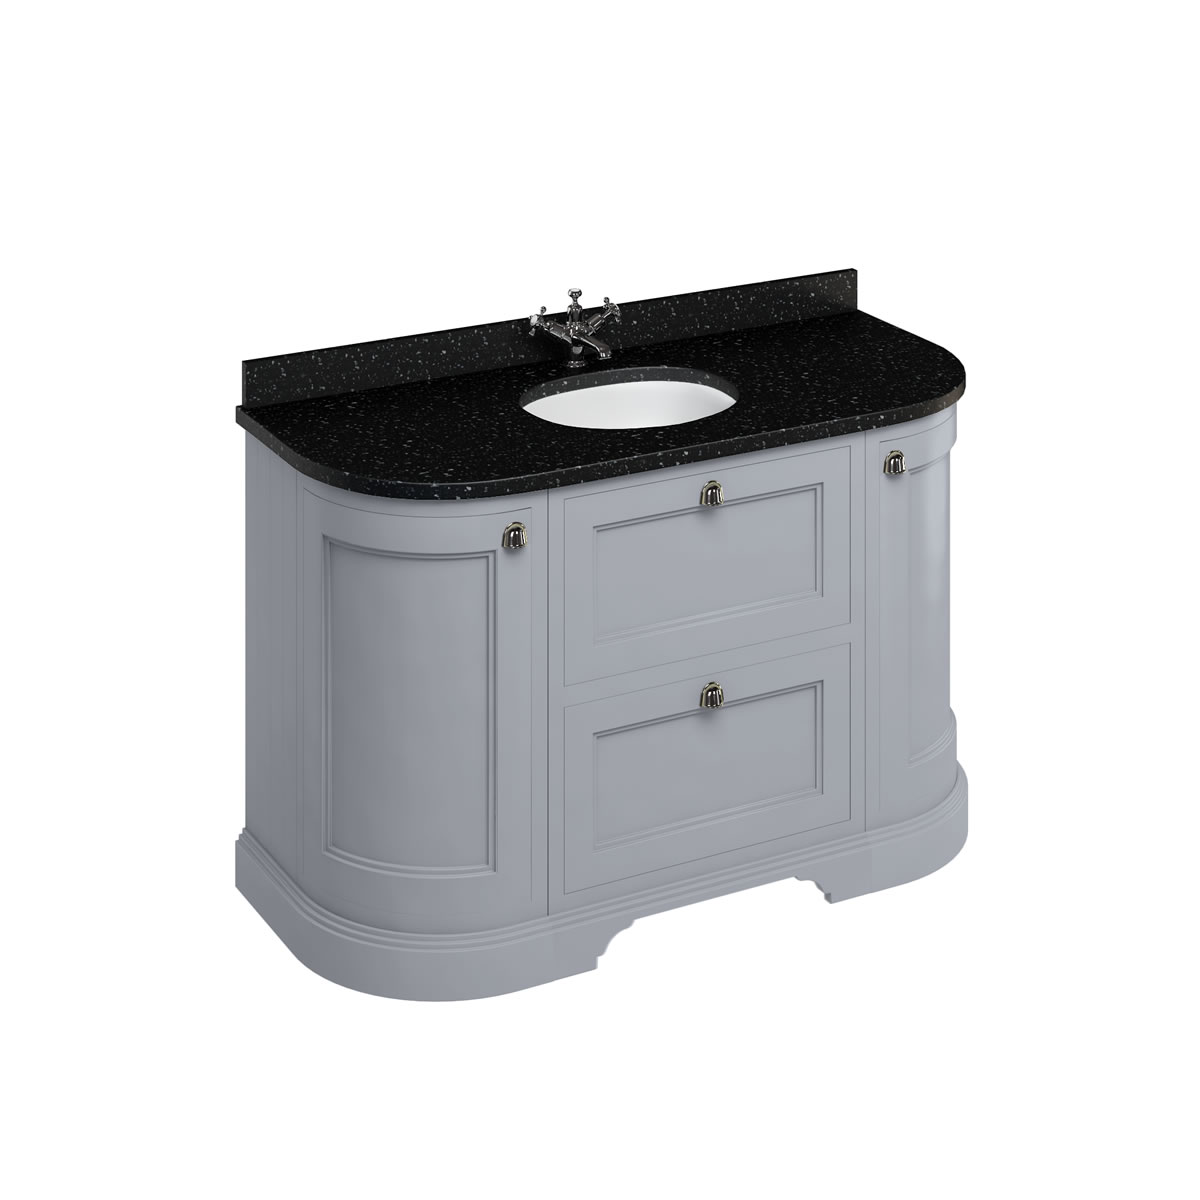 Freestanding 134 Curved Vanity Unit with drawers - Classic Grey and Minerva black granite worktop with integrated white basin 